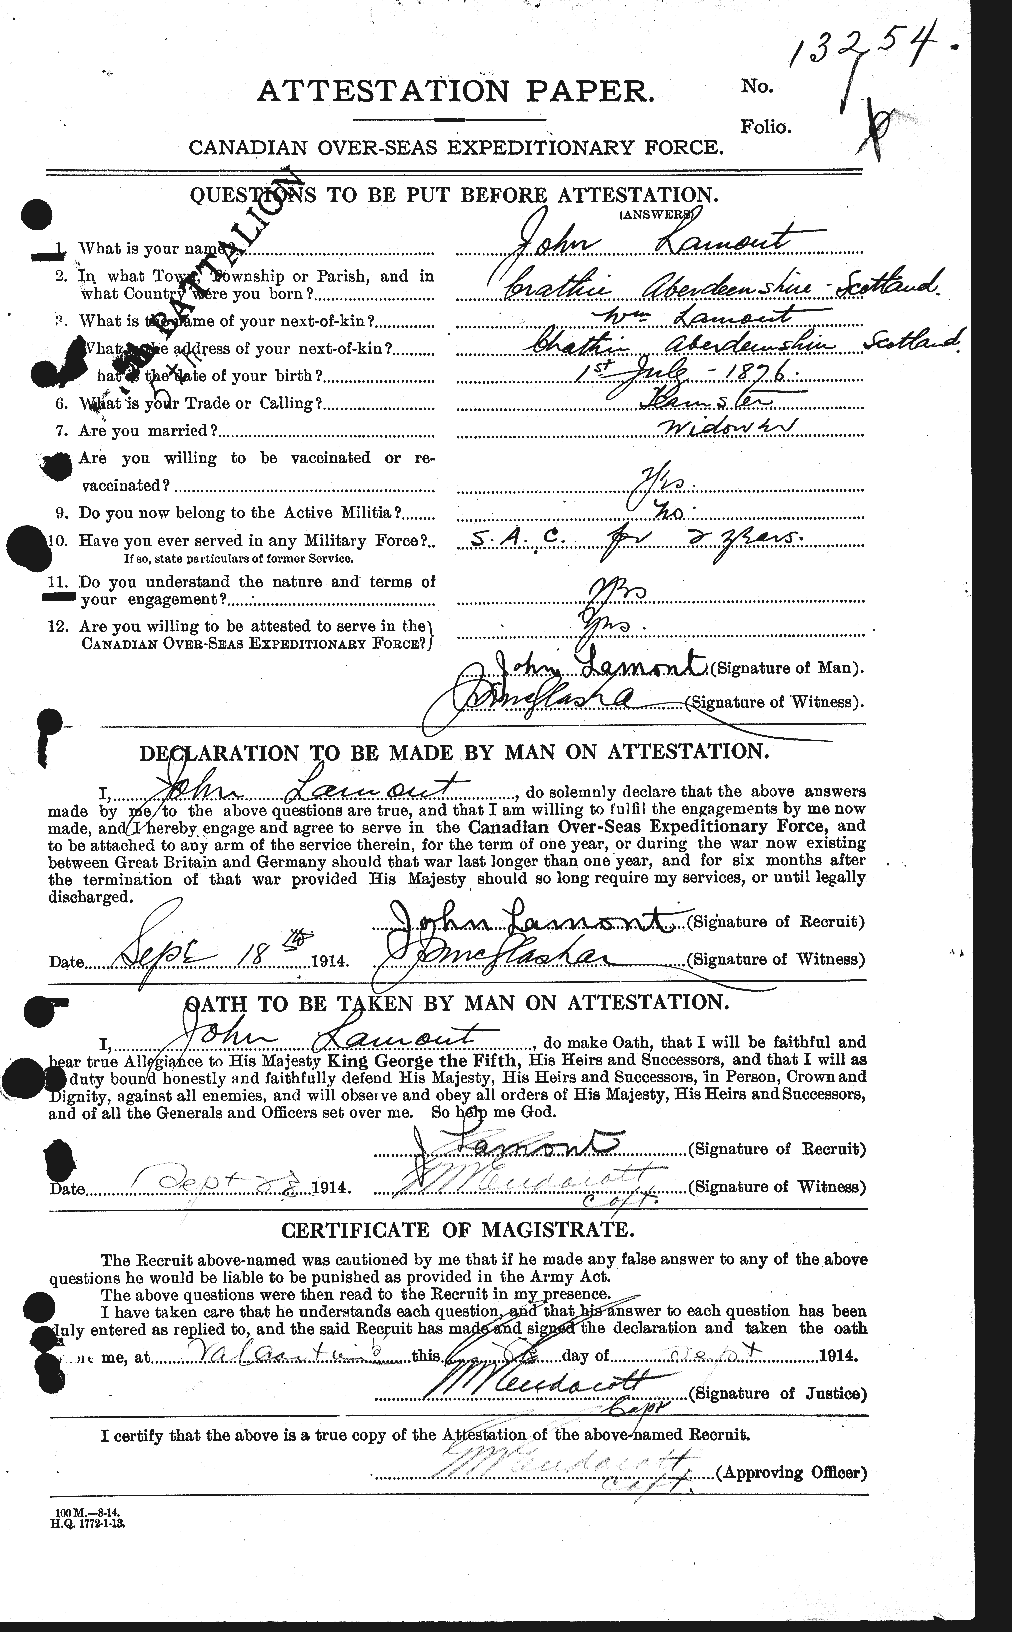 Personnel Records of the First World War - CEF 447953a